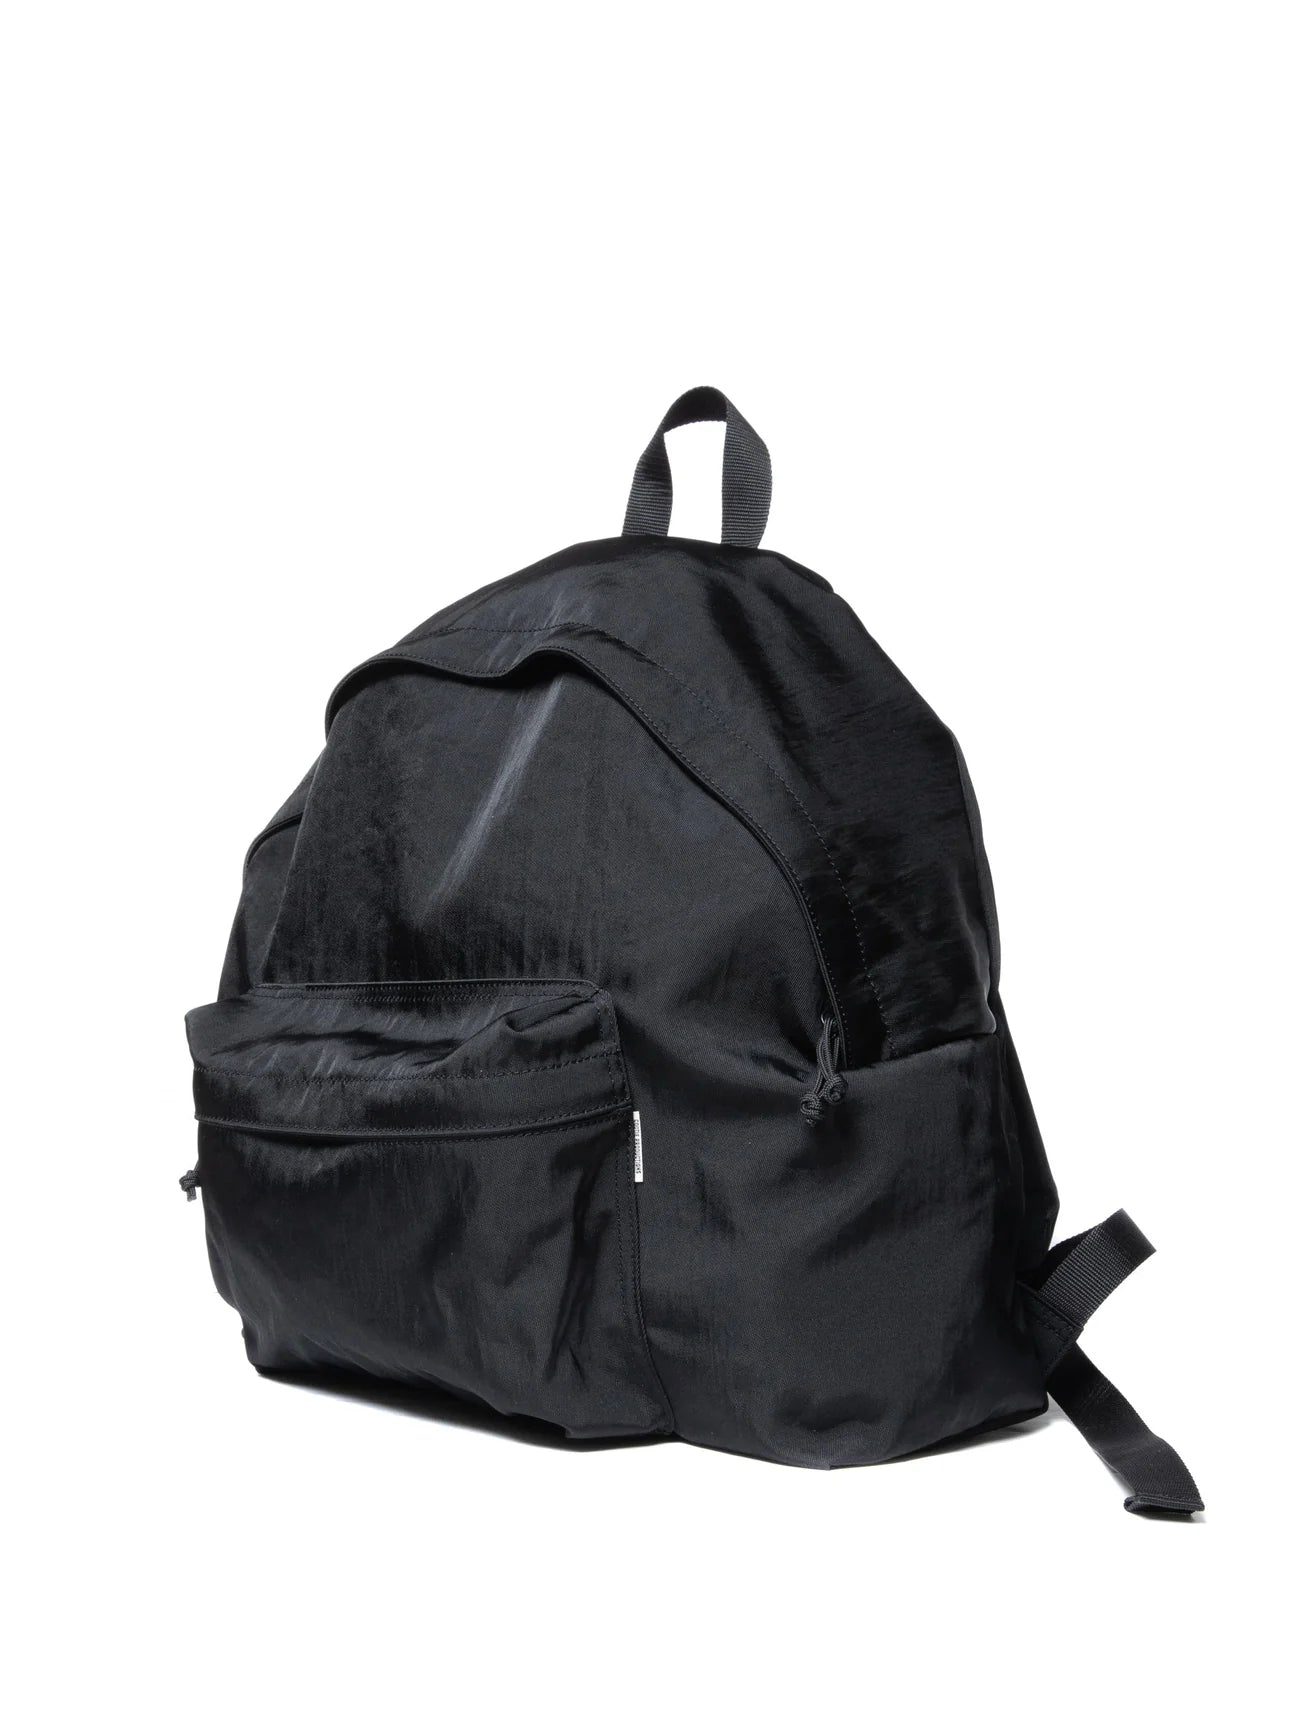 COOTIE PRODUCTIONS STANDARD DAY PACK (WASHER NYLON TWILL)